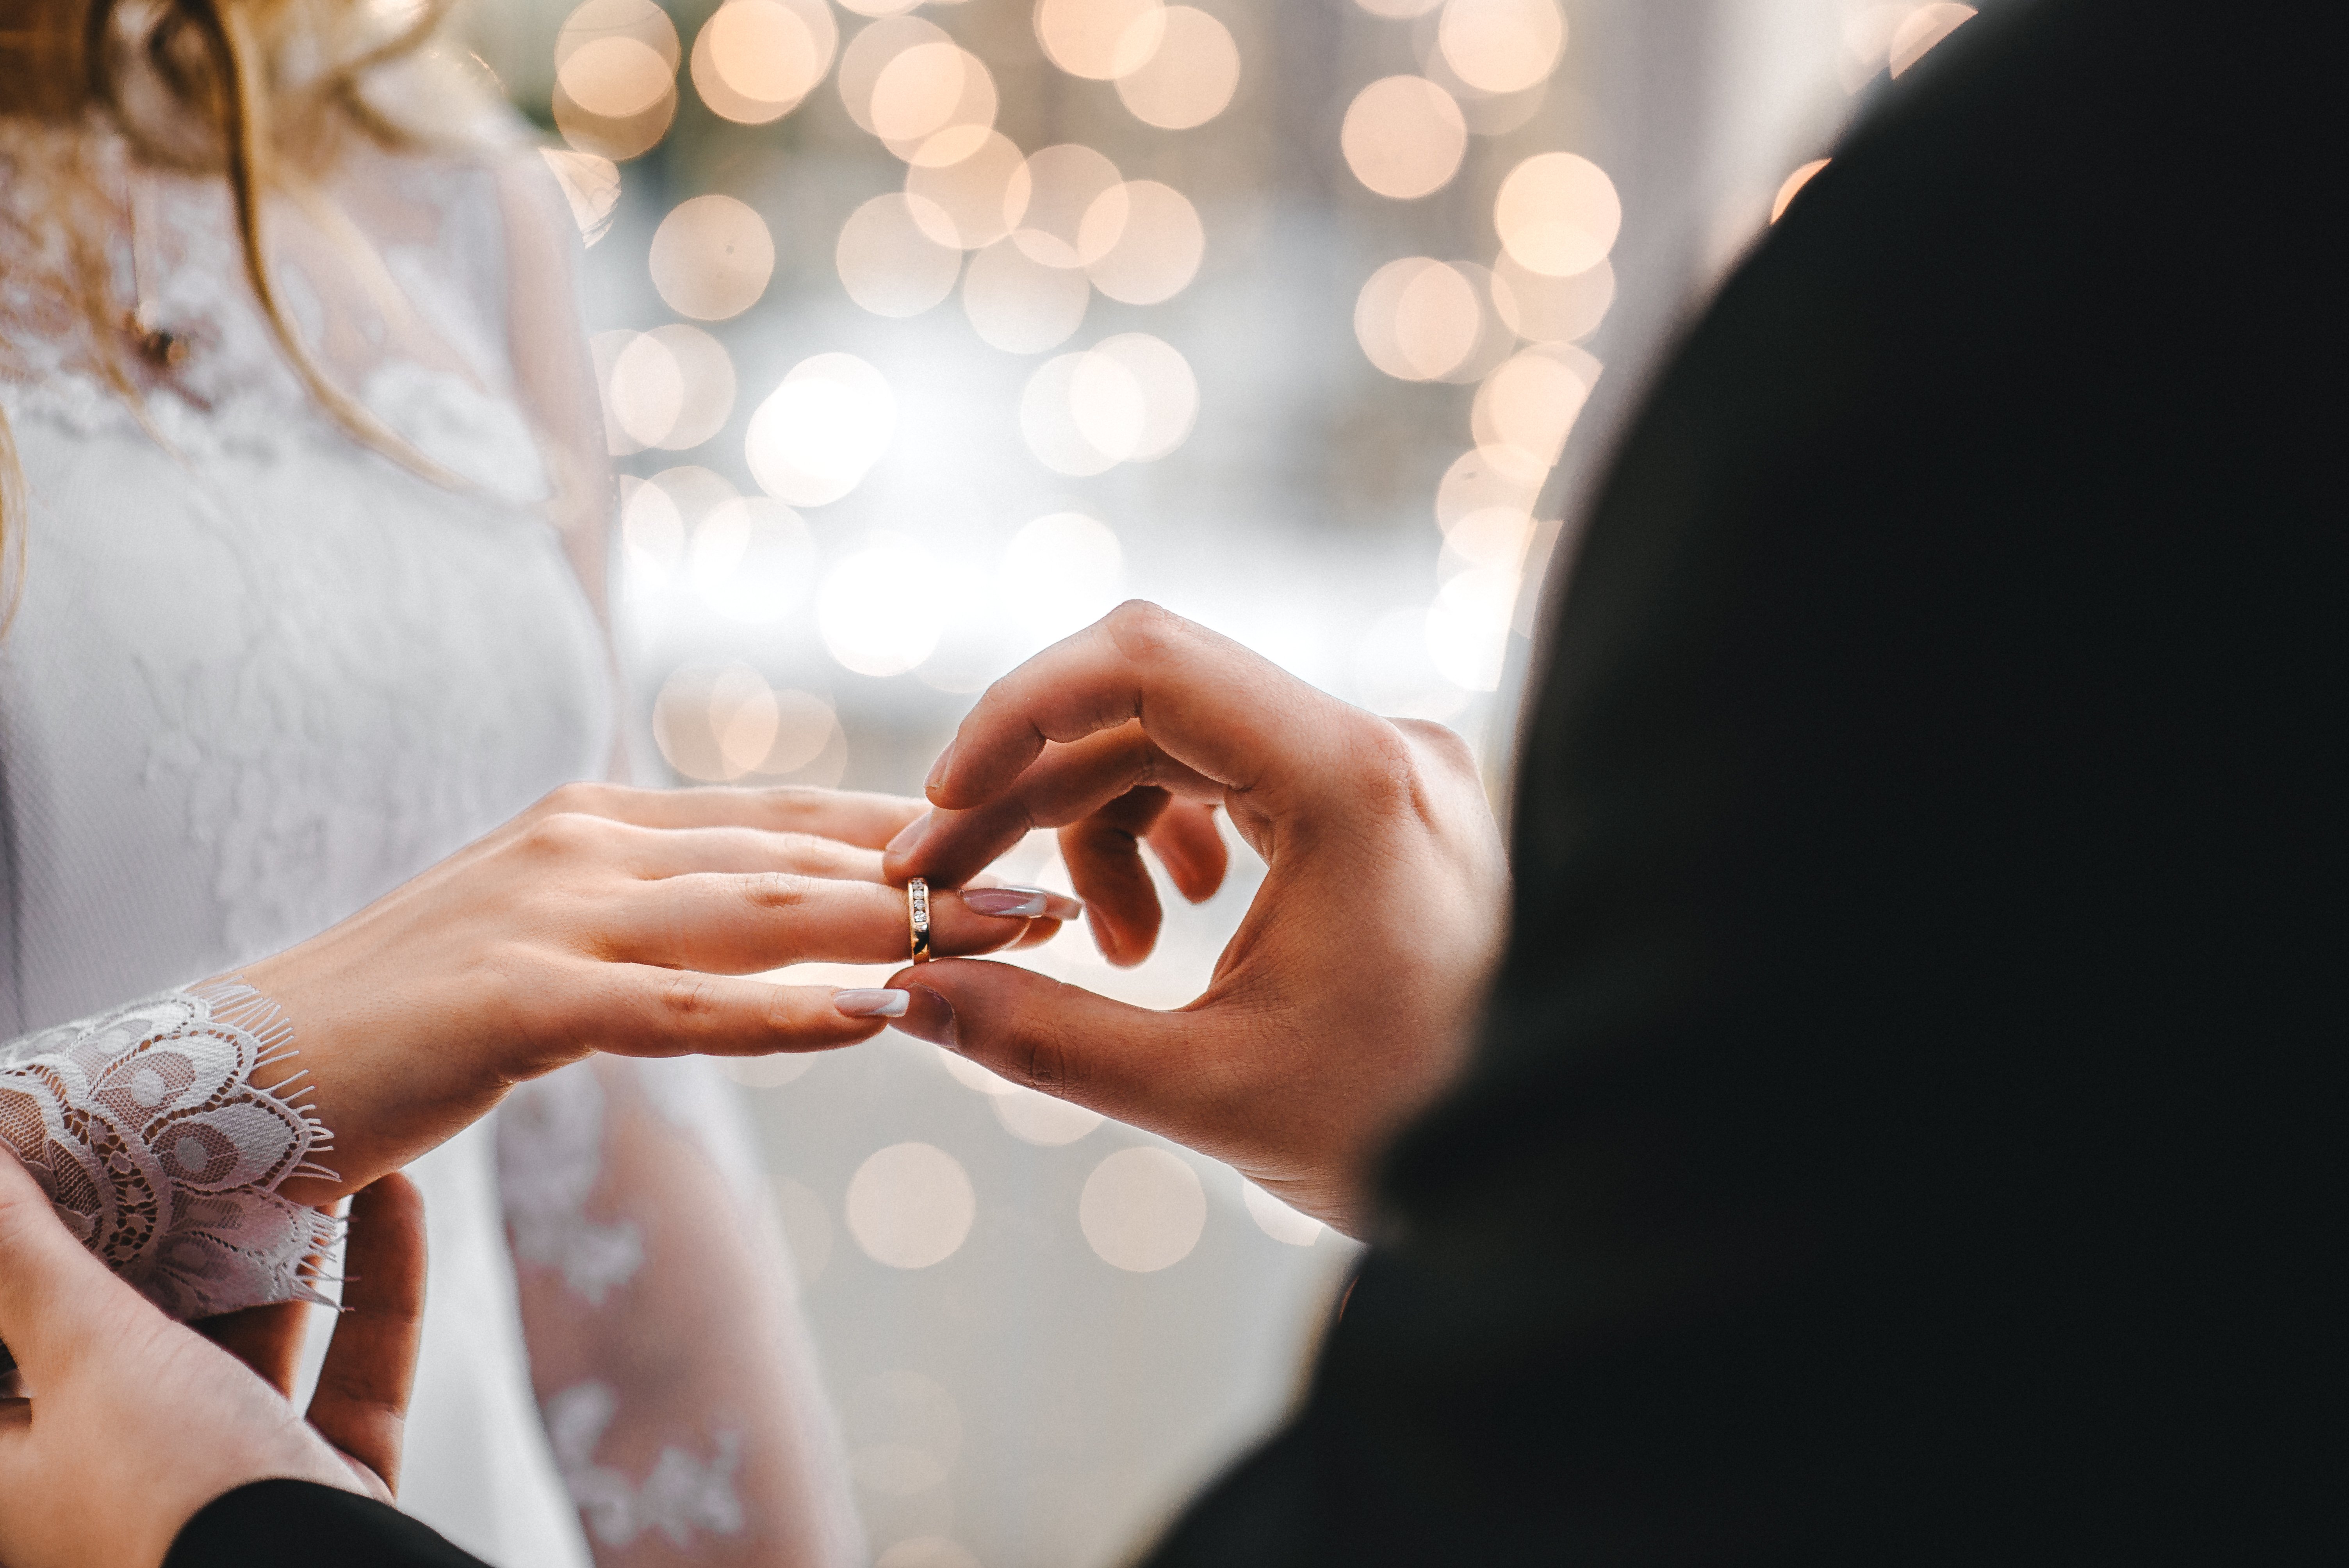 The groom placing the wedding ring on his bride. | Shutterstock